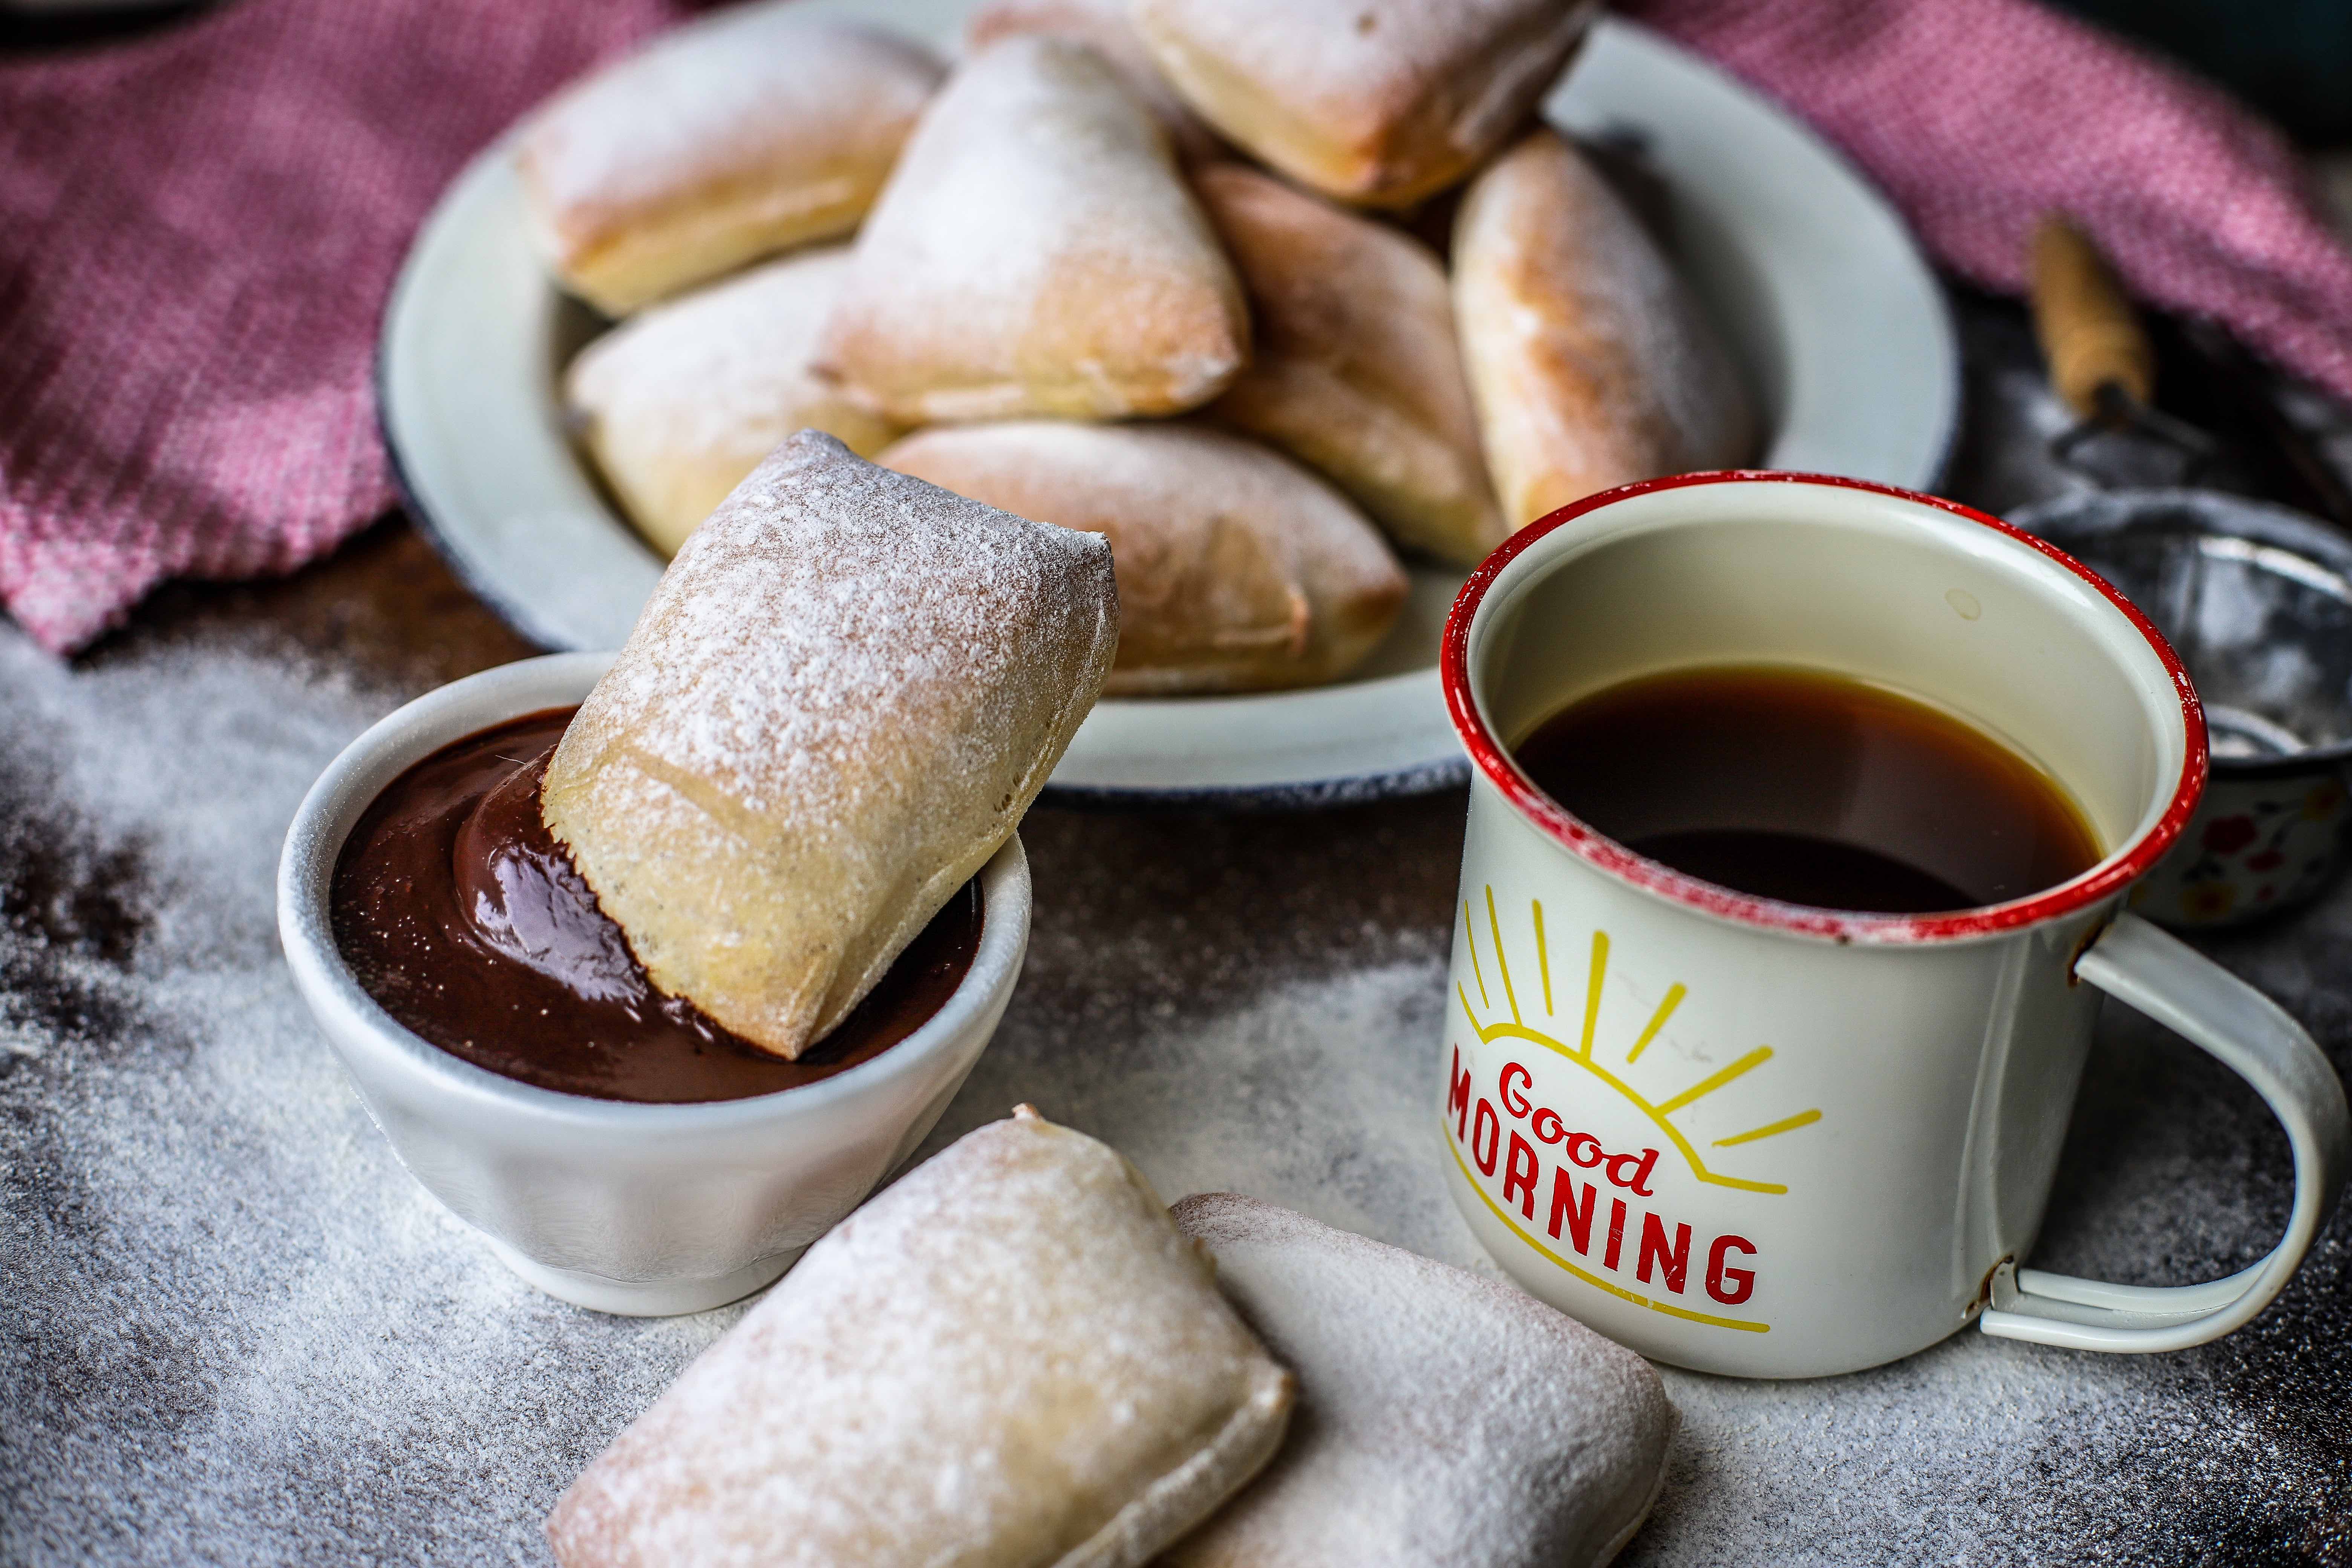 Baked version of New Orleans iconic doughnut, the beignet. Square pillows of soft yeast dough are baked and showered in confectioners' sugar then dipped into a thick, homemade hot chocolate sauce. A traditional Mardi Gras - Fat Tuesday - treat.